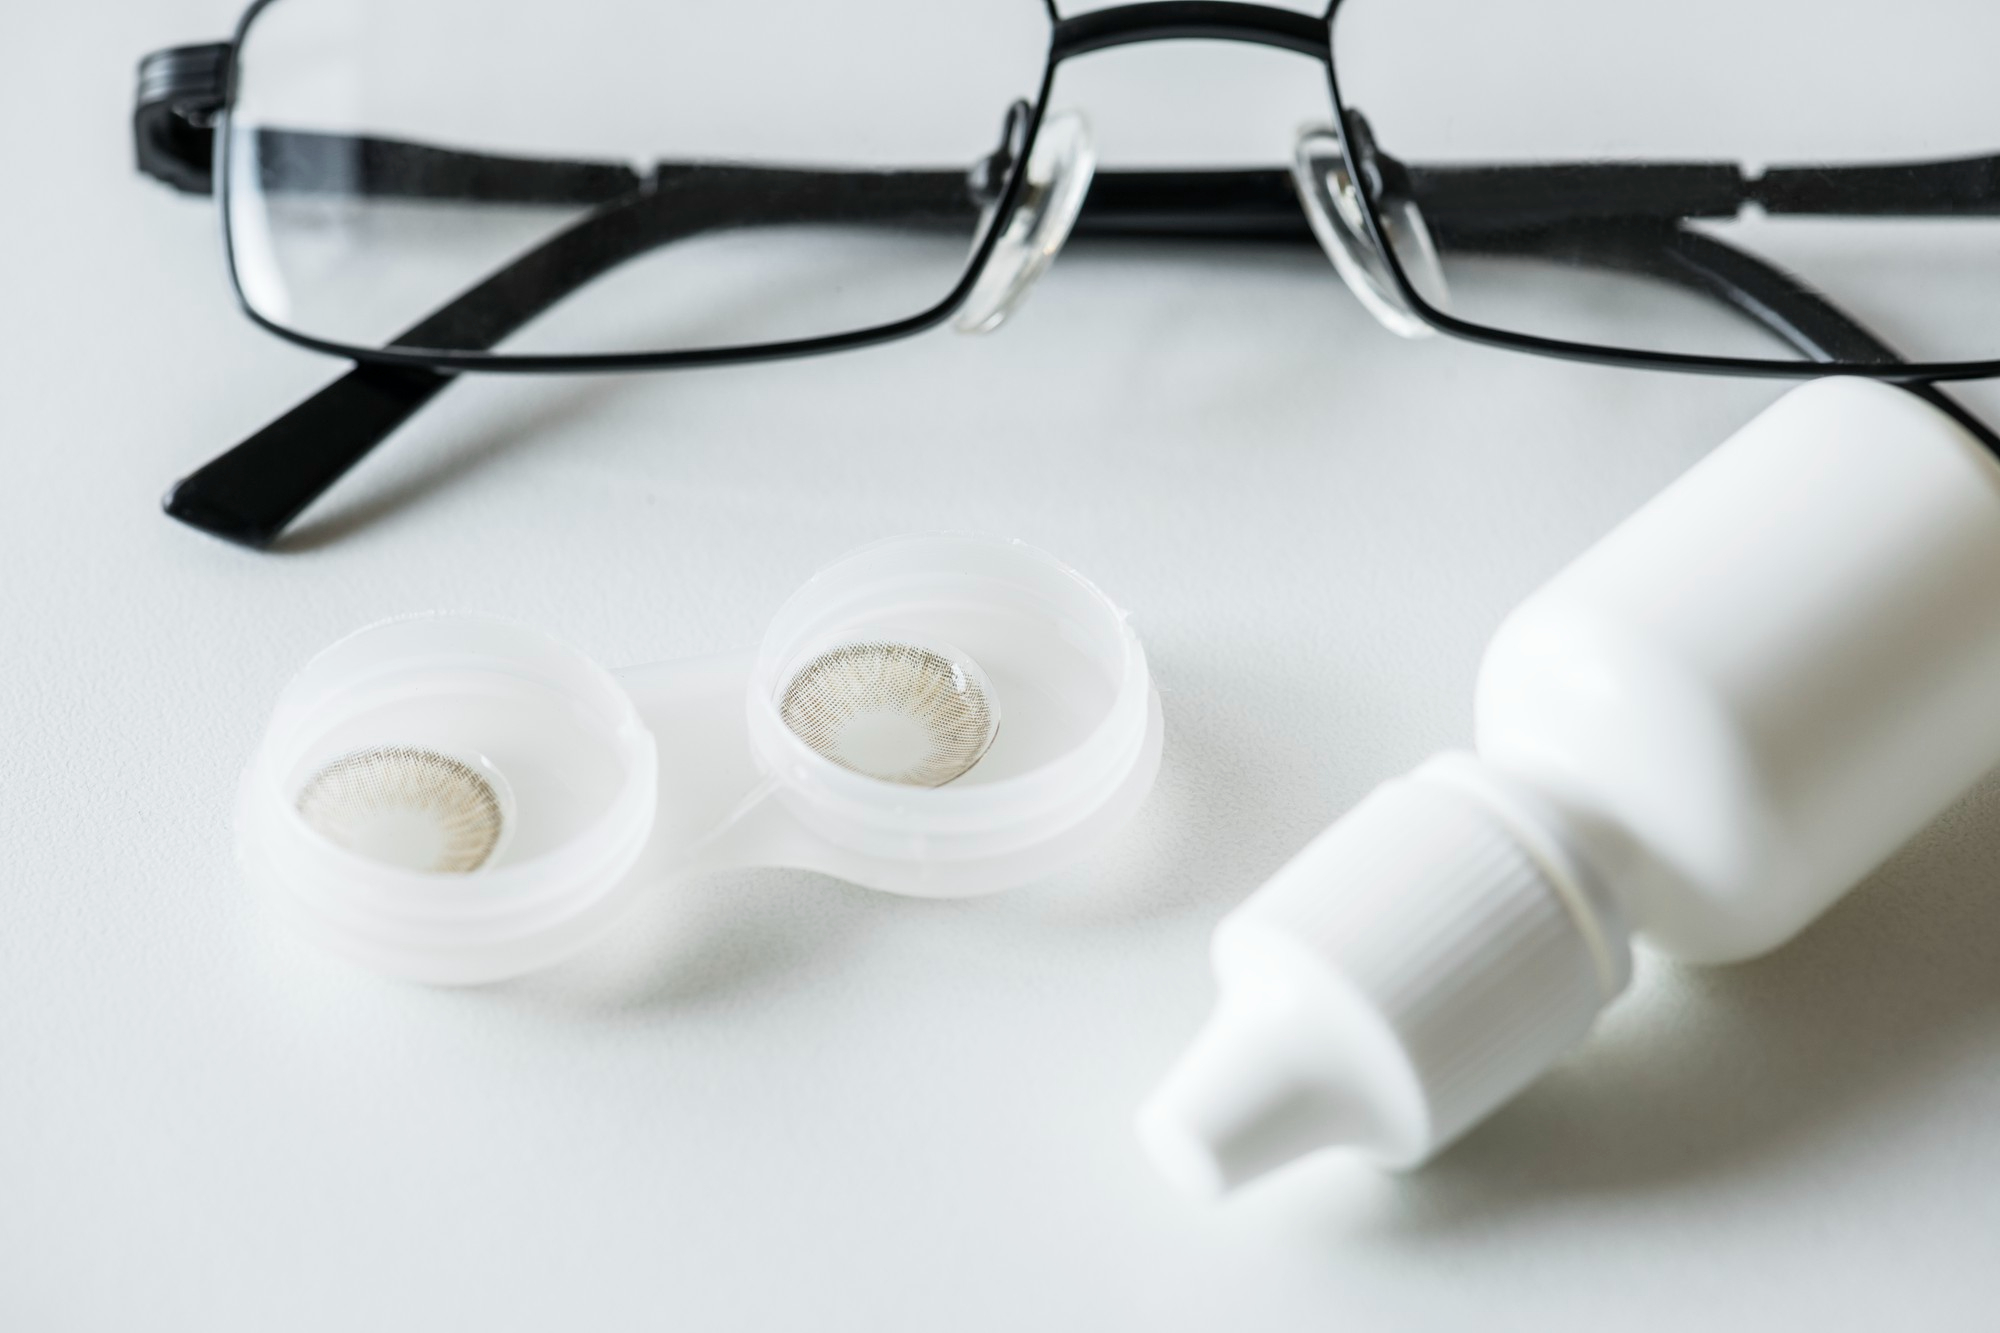 ICL surgery can lessen the need for contact lenses and glasses